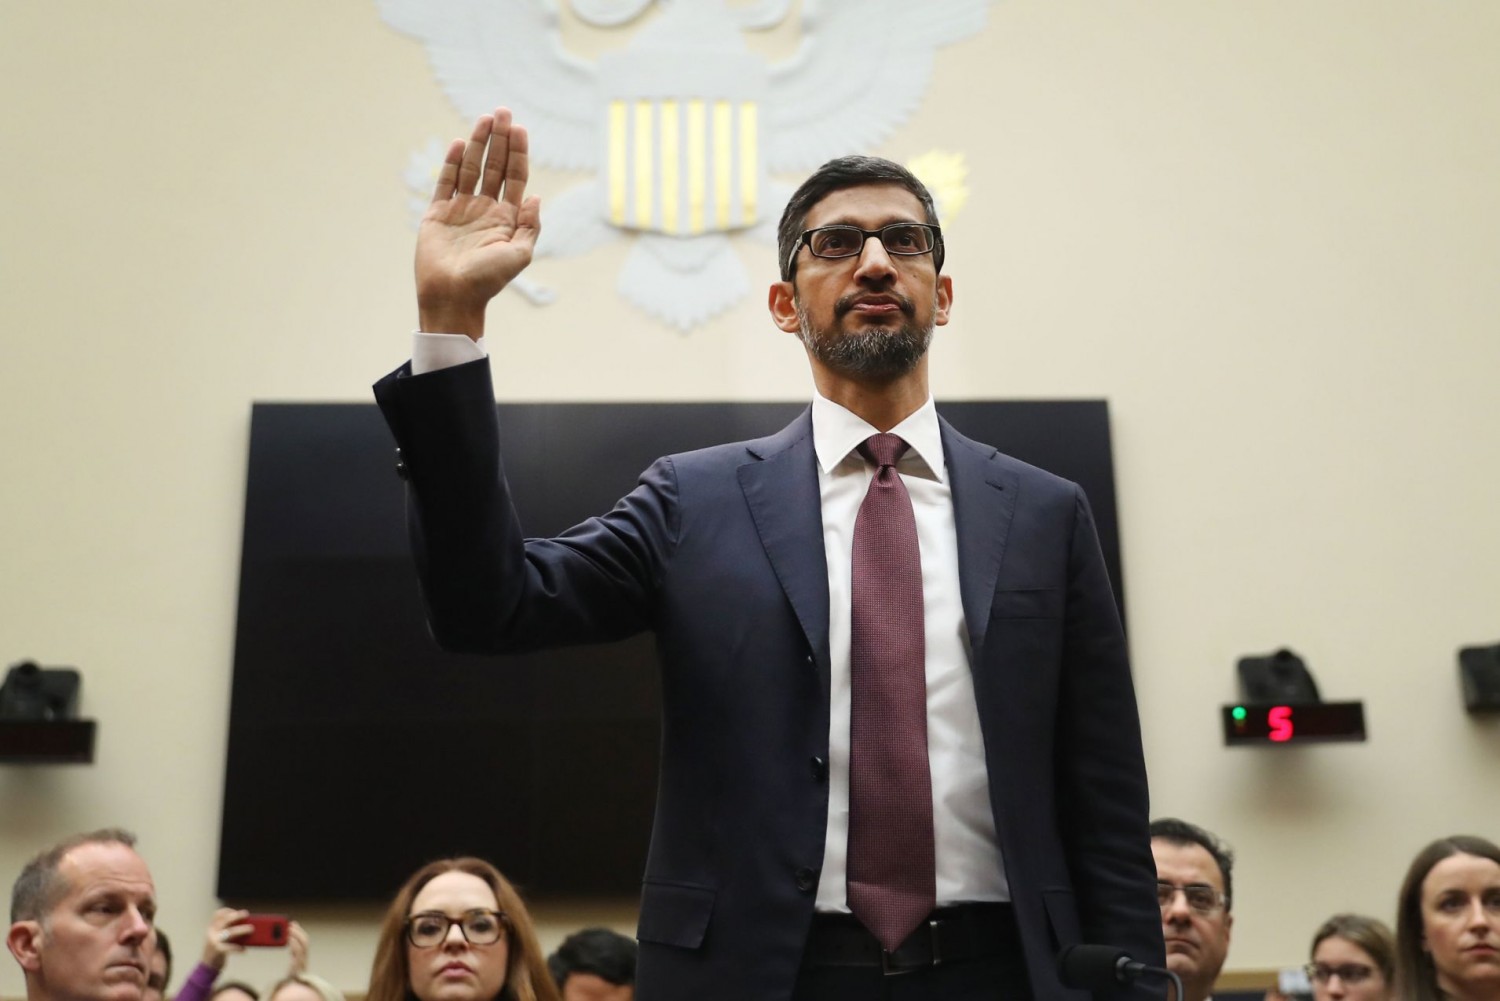 Sundar Pichai, chief executive officer of Google, is sworn in during a House Judiciary Committee hearing in Washington, D.C., U.S., on Tuesday, Dec. 11, 2018. Andrew Harrer | Bloomberg | Getty Images